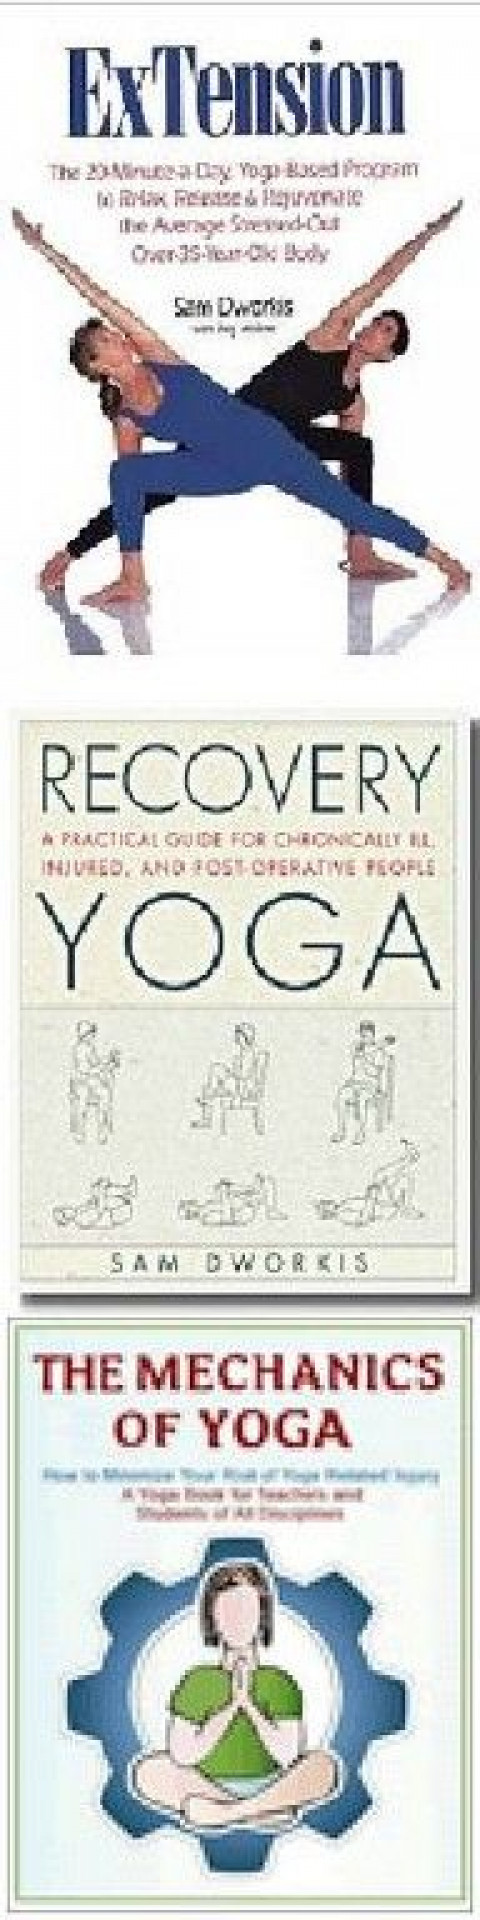 Visit ExTension & Recovery Yoga